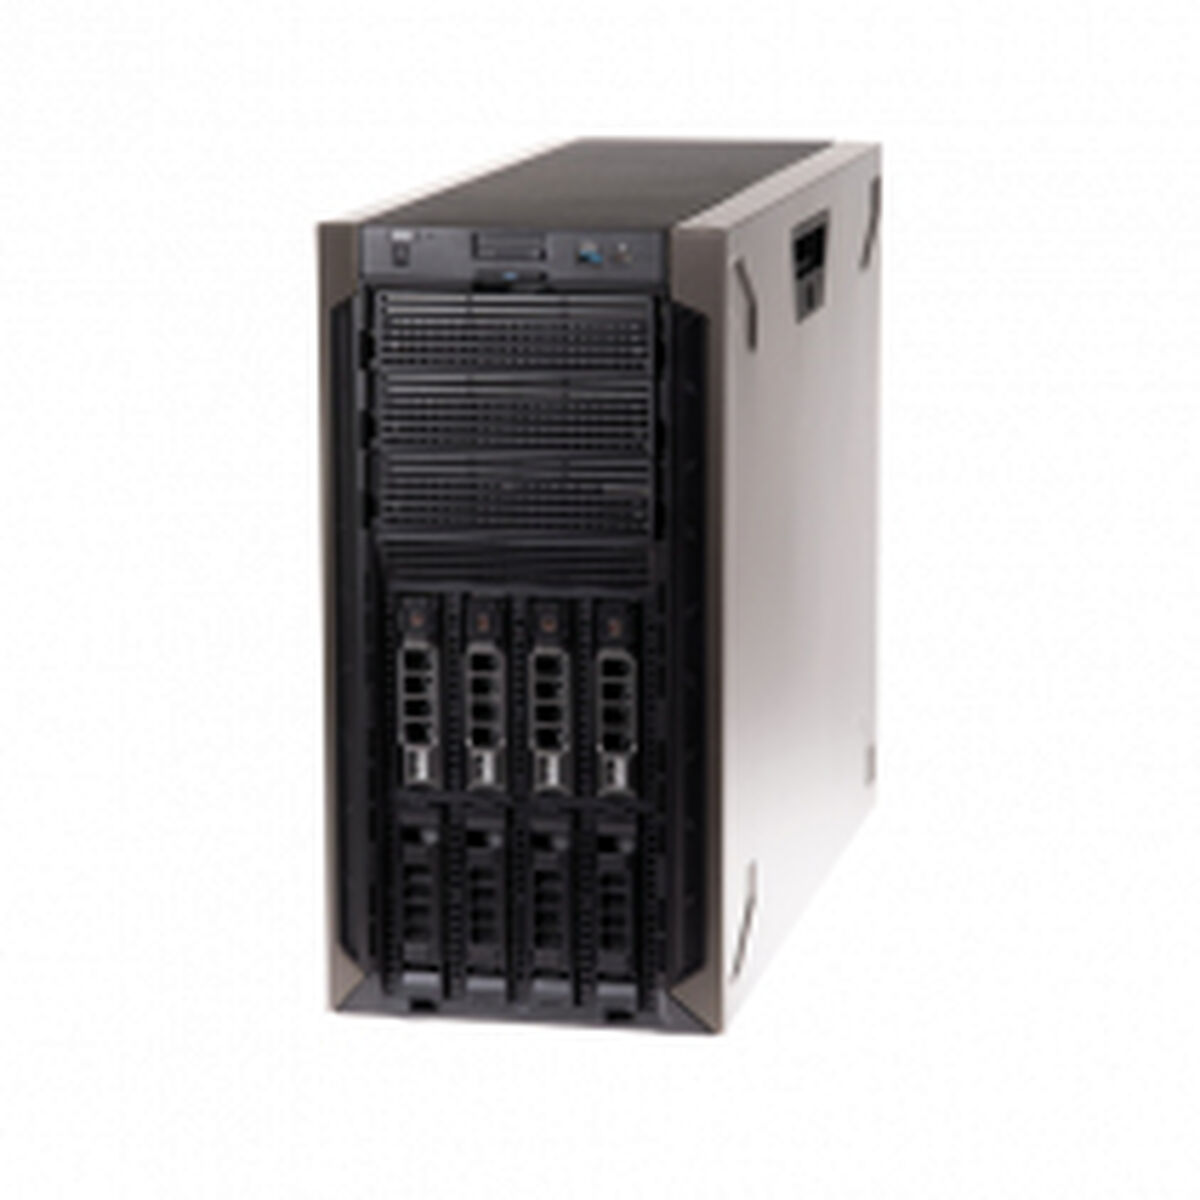 Server Axis AXIS S1132 32 TB, Axis, Computing, server-axis-axis-s1132-32-tb, :32 TB, Brand_Axis, category-reference-2609, category-reference-2791, category-reference-2799, category-reference-t-19685, computers / components, Condition_NEW, office, Price_+ 1000, Teleworking, RiotNook